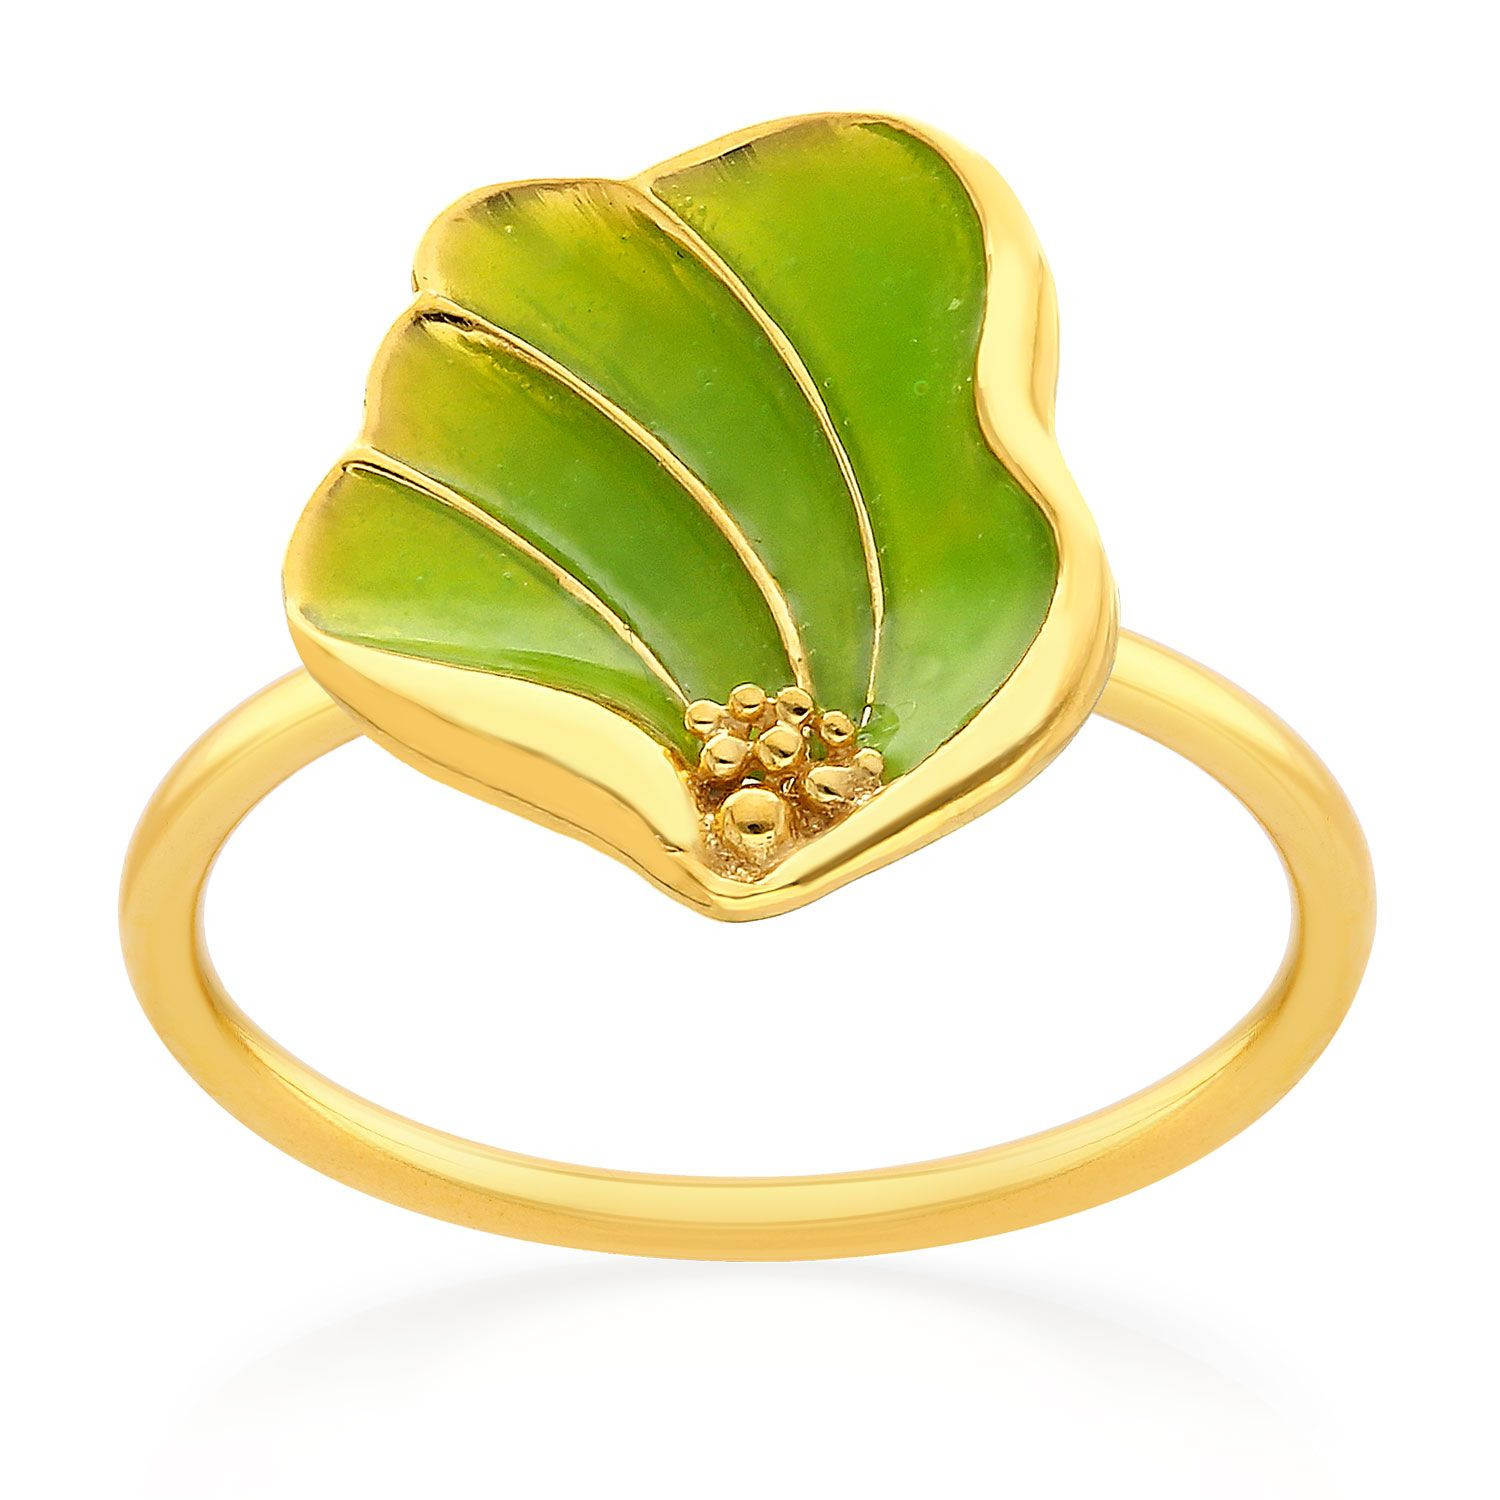 Buy Malabar Gold 18 KT Gold Casual Ring for Women Online